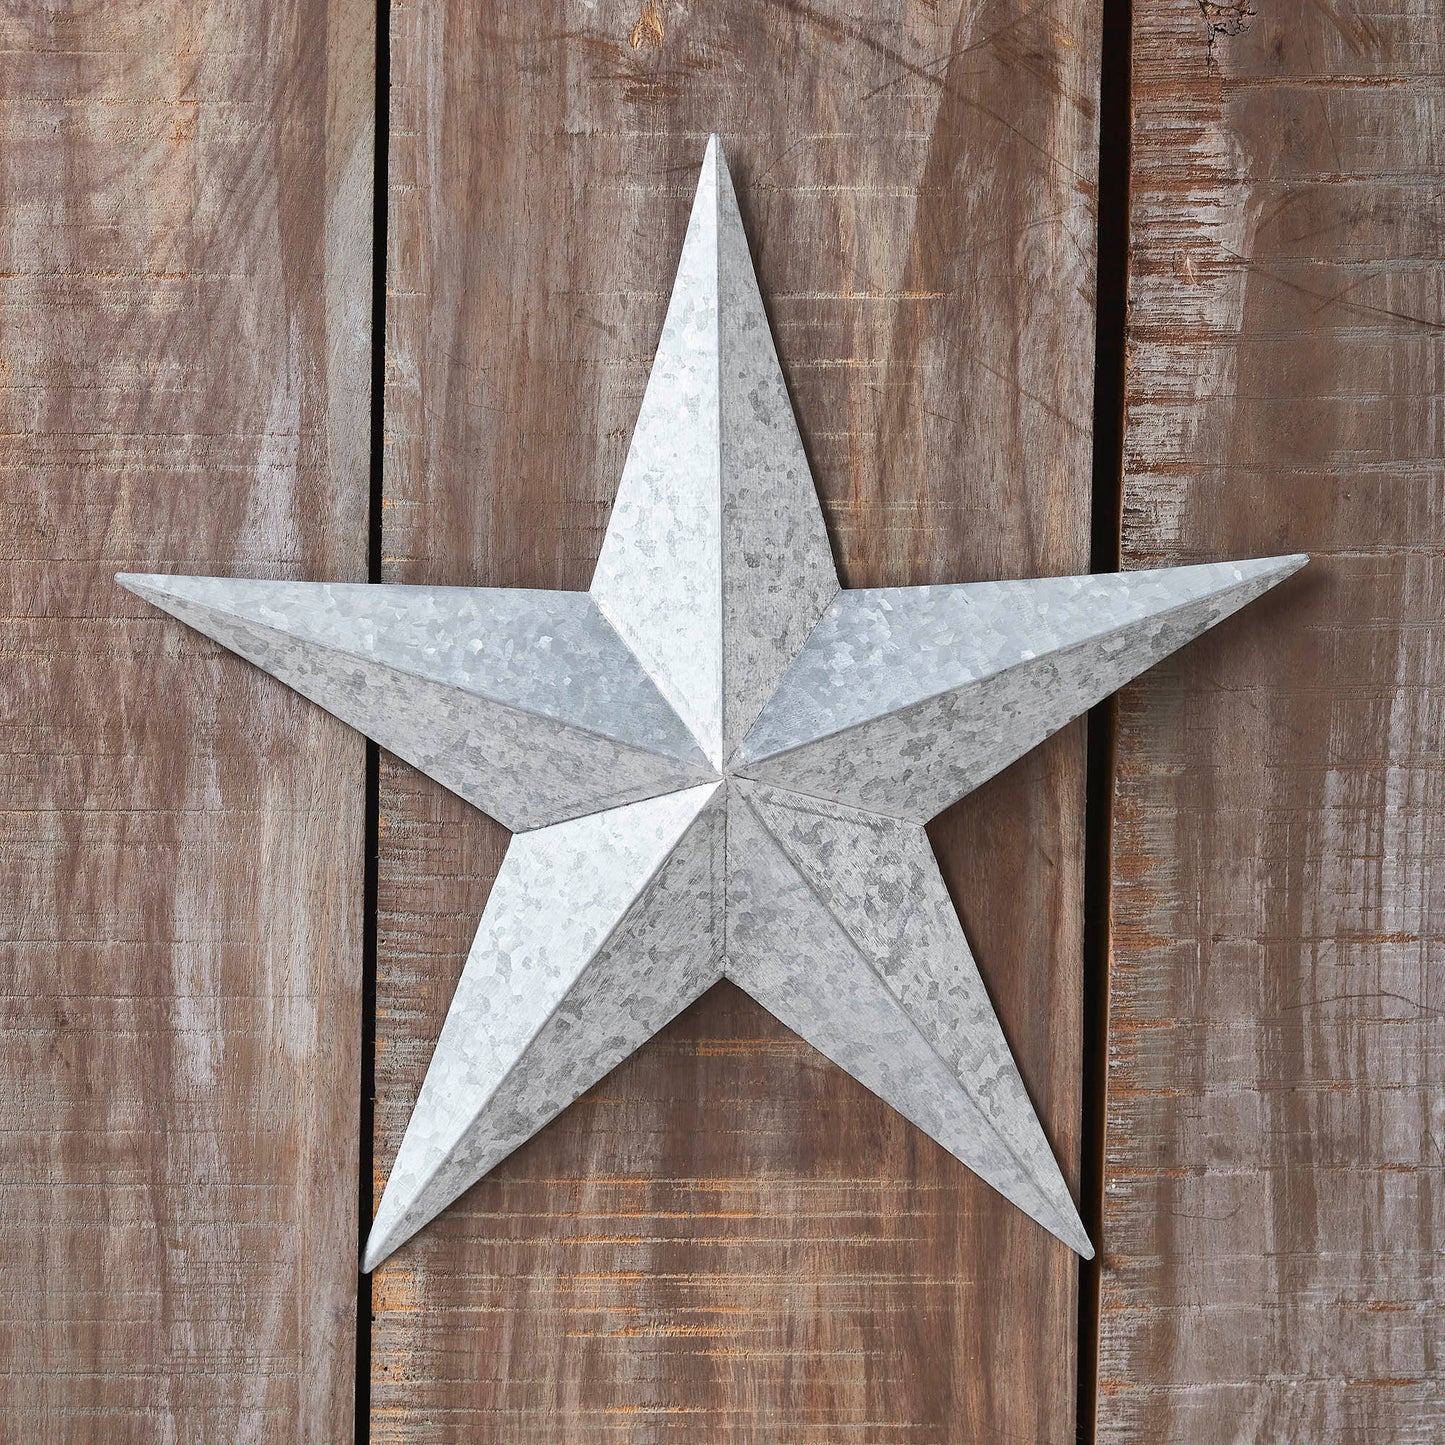 VHC Brands Patriotic Faceted Metal Star Galvanized Wall Hanging 12x12, Independence Day Decor, American Star Design, Distressed Appearance Metal Wall Hanging,  Star Shape, Country, Metal Grey